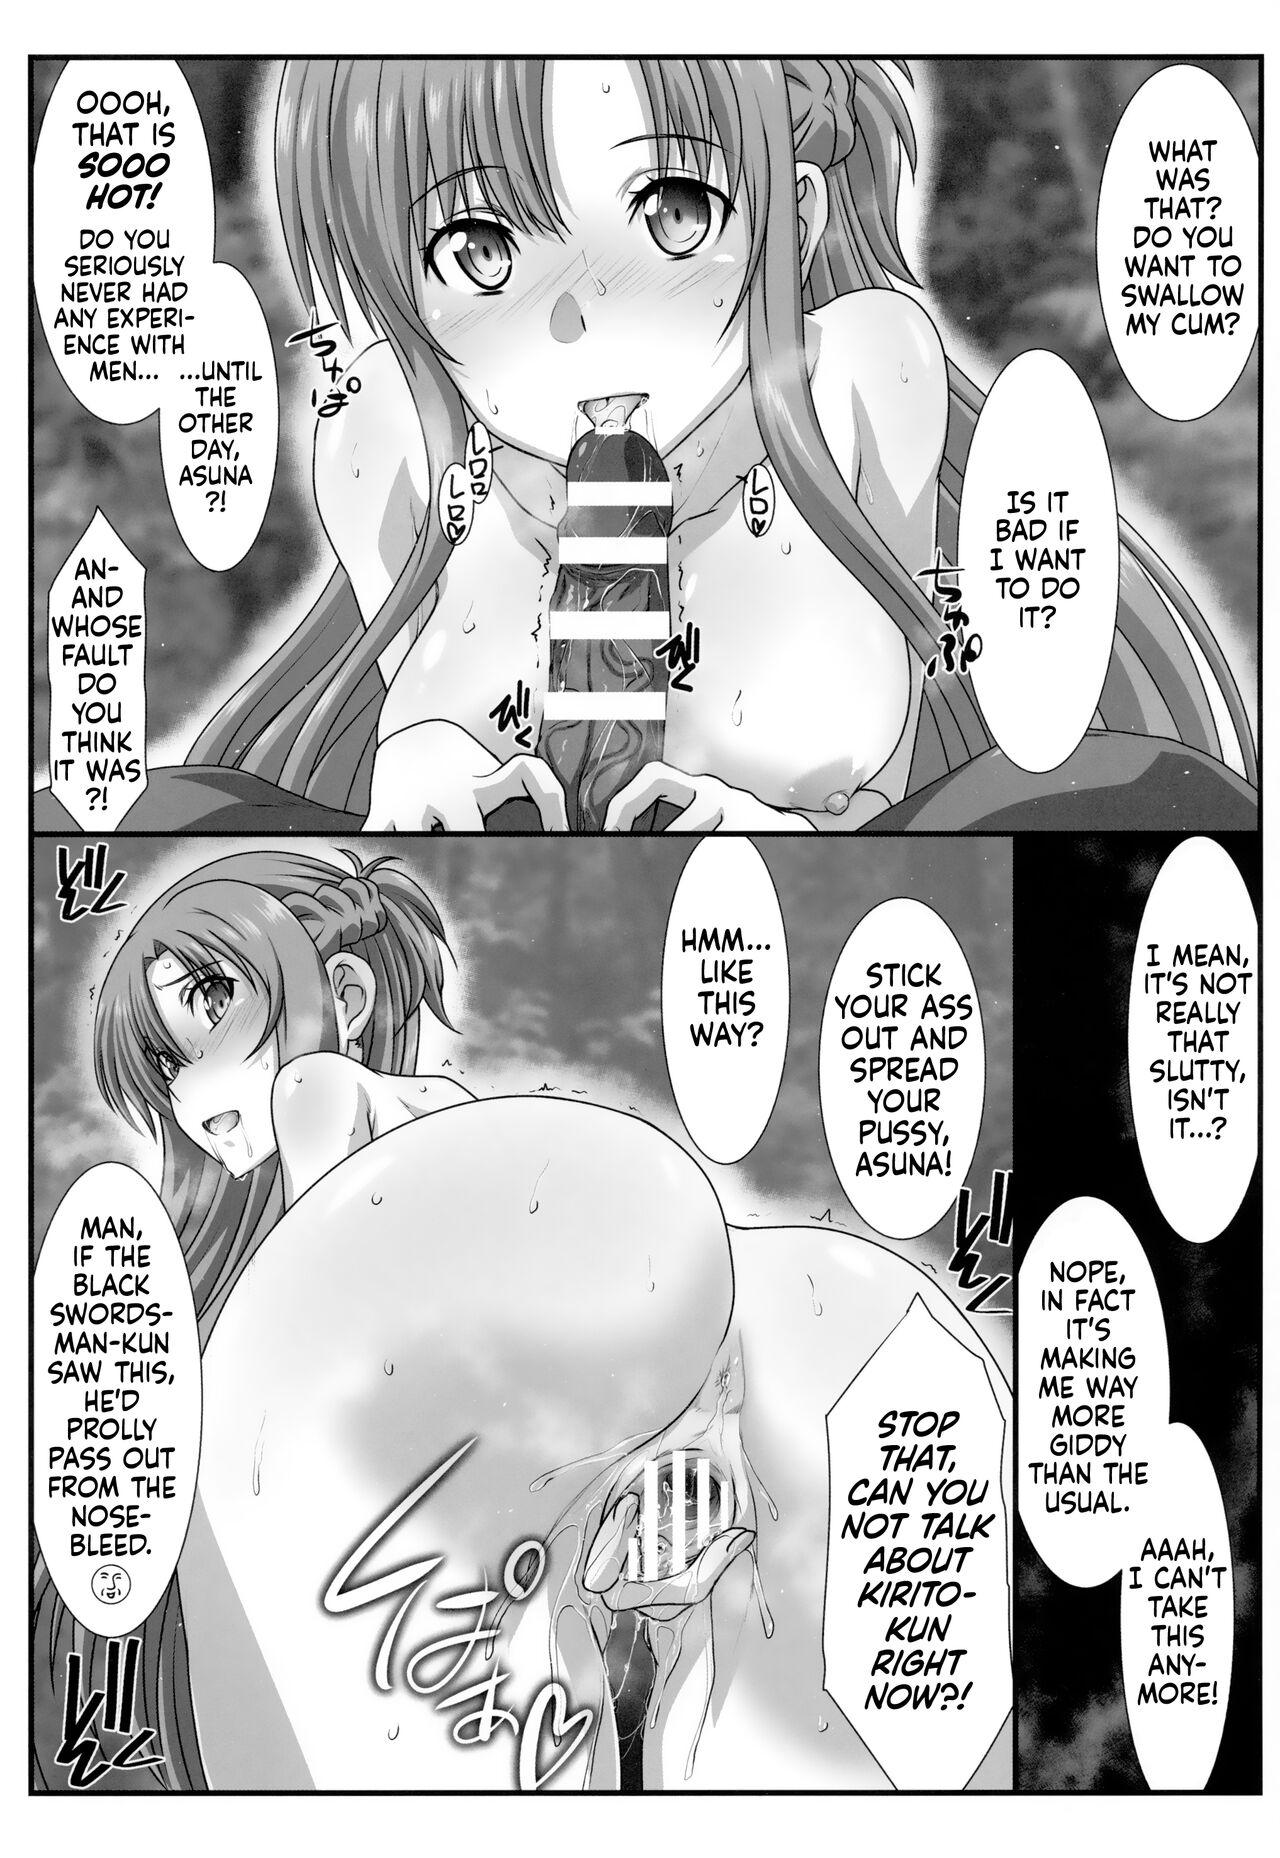 Nudity Astral Bout Ver. 45 - Sword art online Pussy Fingering - Page 8